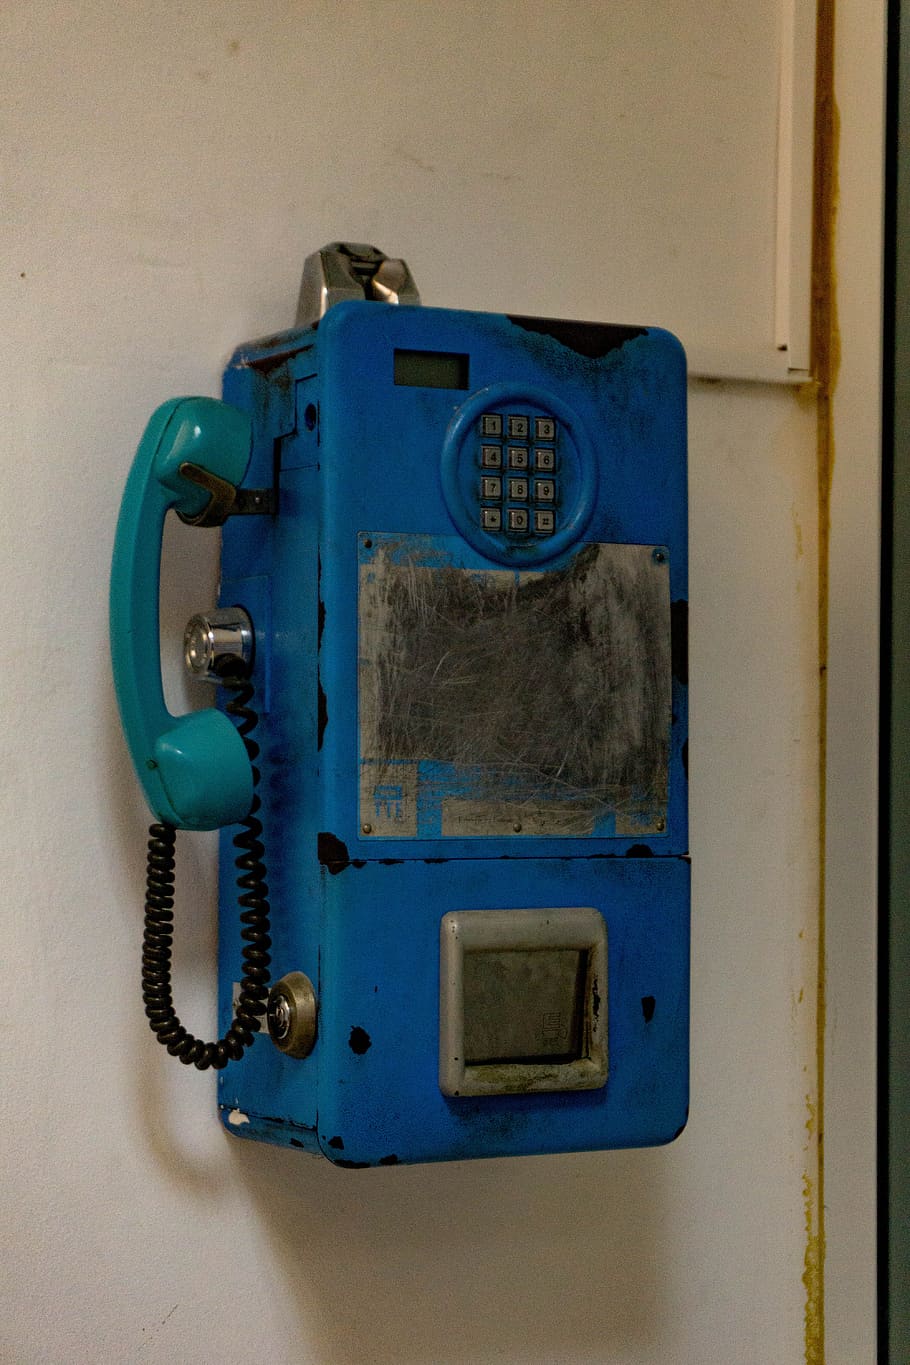 phone, wall, b, device, information, telephone, technology, connection, wall - building feature, close-up